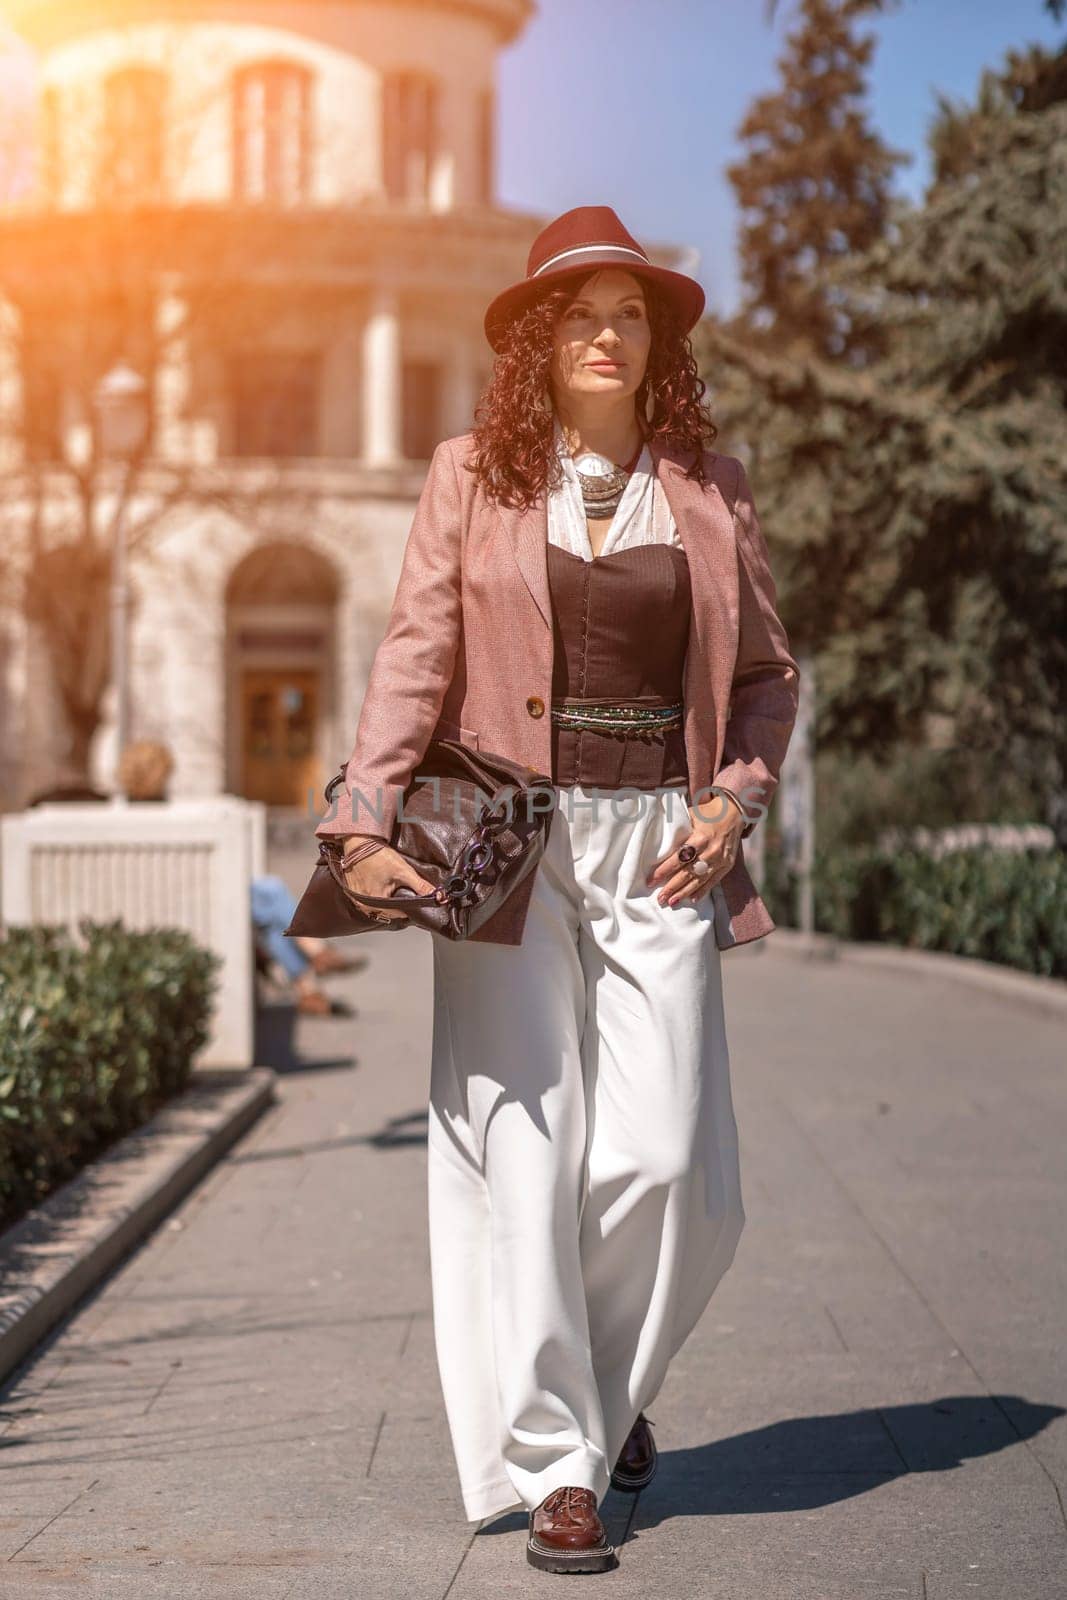 Woman park city. Stylish woman in a hat walks in a park in the city. Dressed in white corset trousers and a pink jacket with a bag in her hands